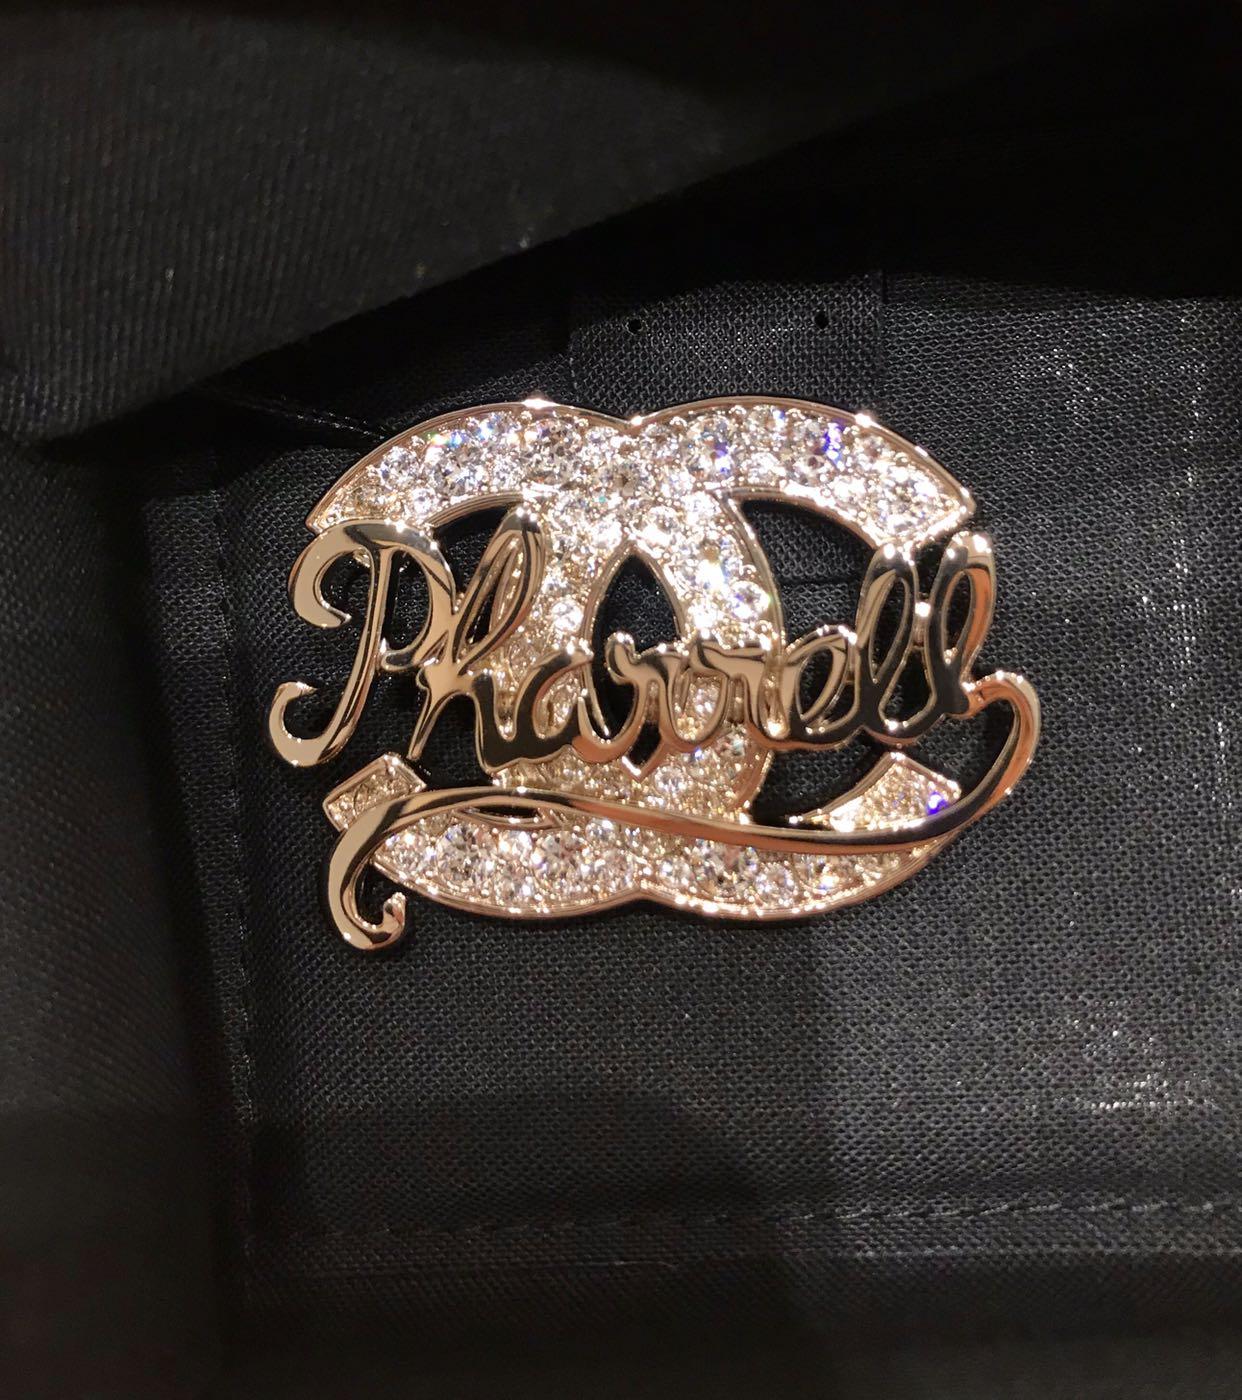 Chanel Pharrell collaboration Brooch - SOLD OUT, Luxury